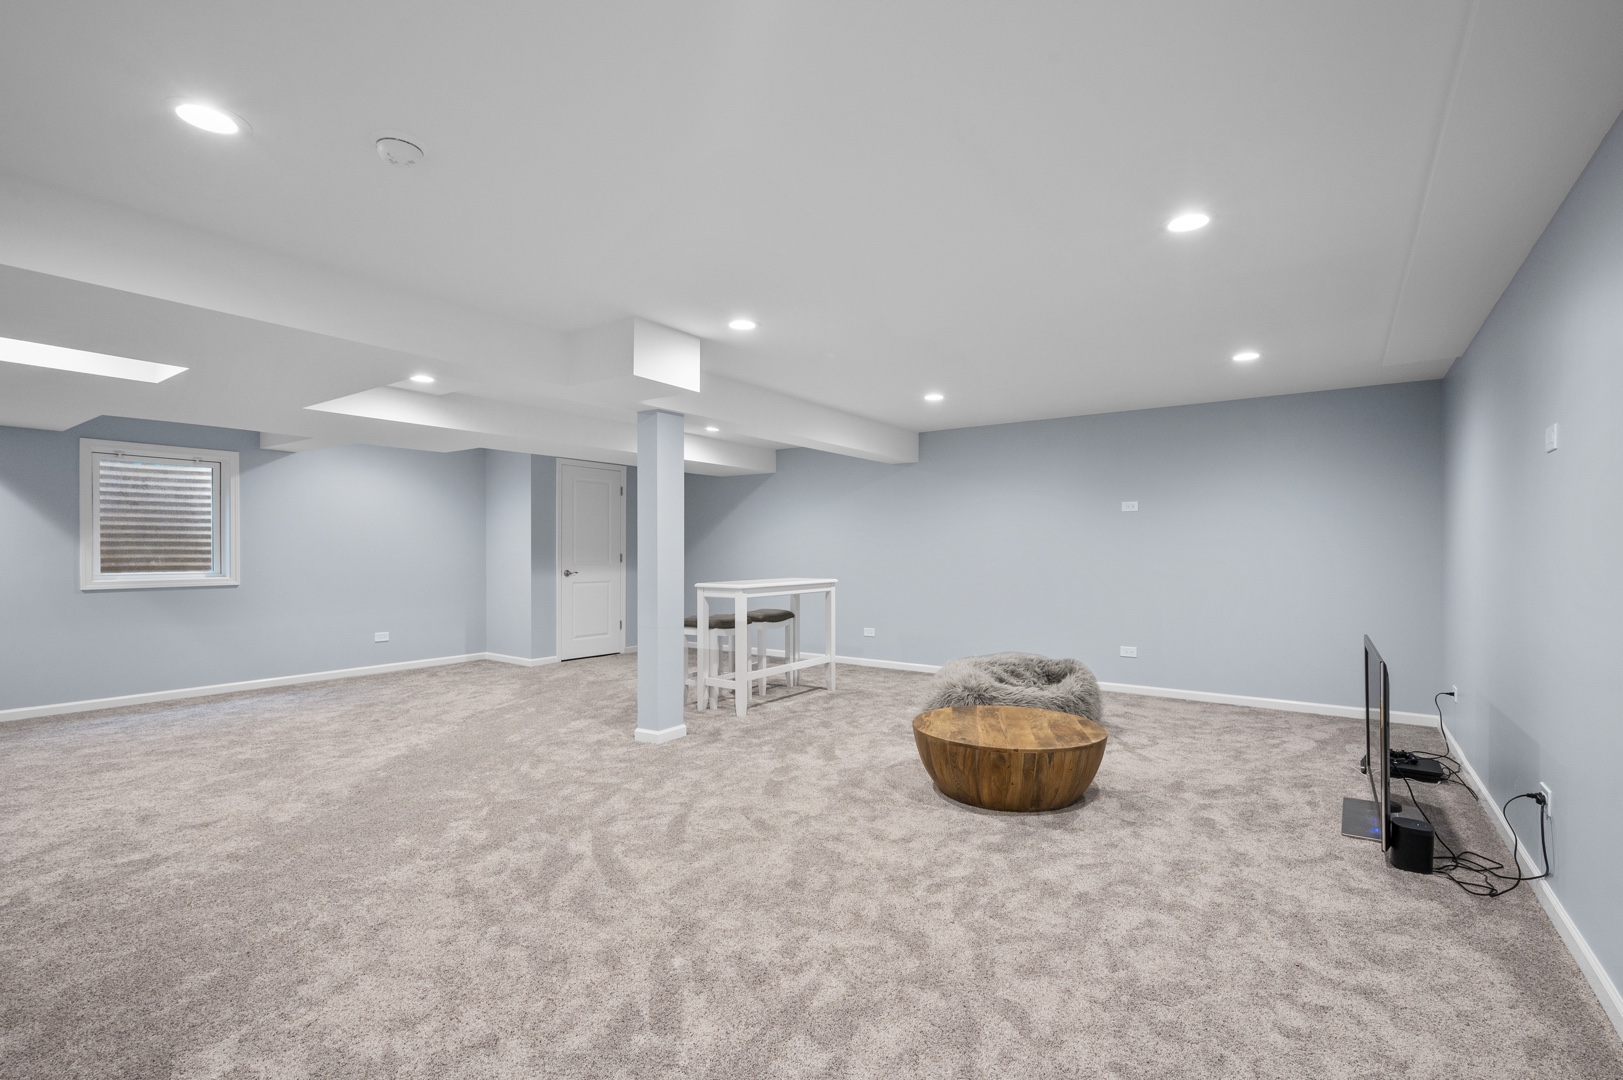 An open basement with white and blue walls, center beams, and bright recessed lighting